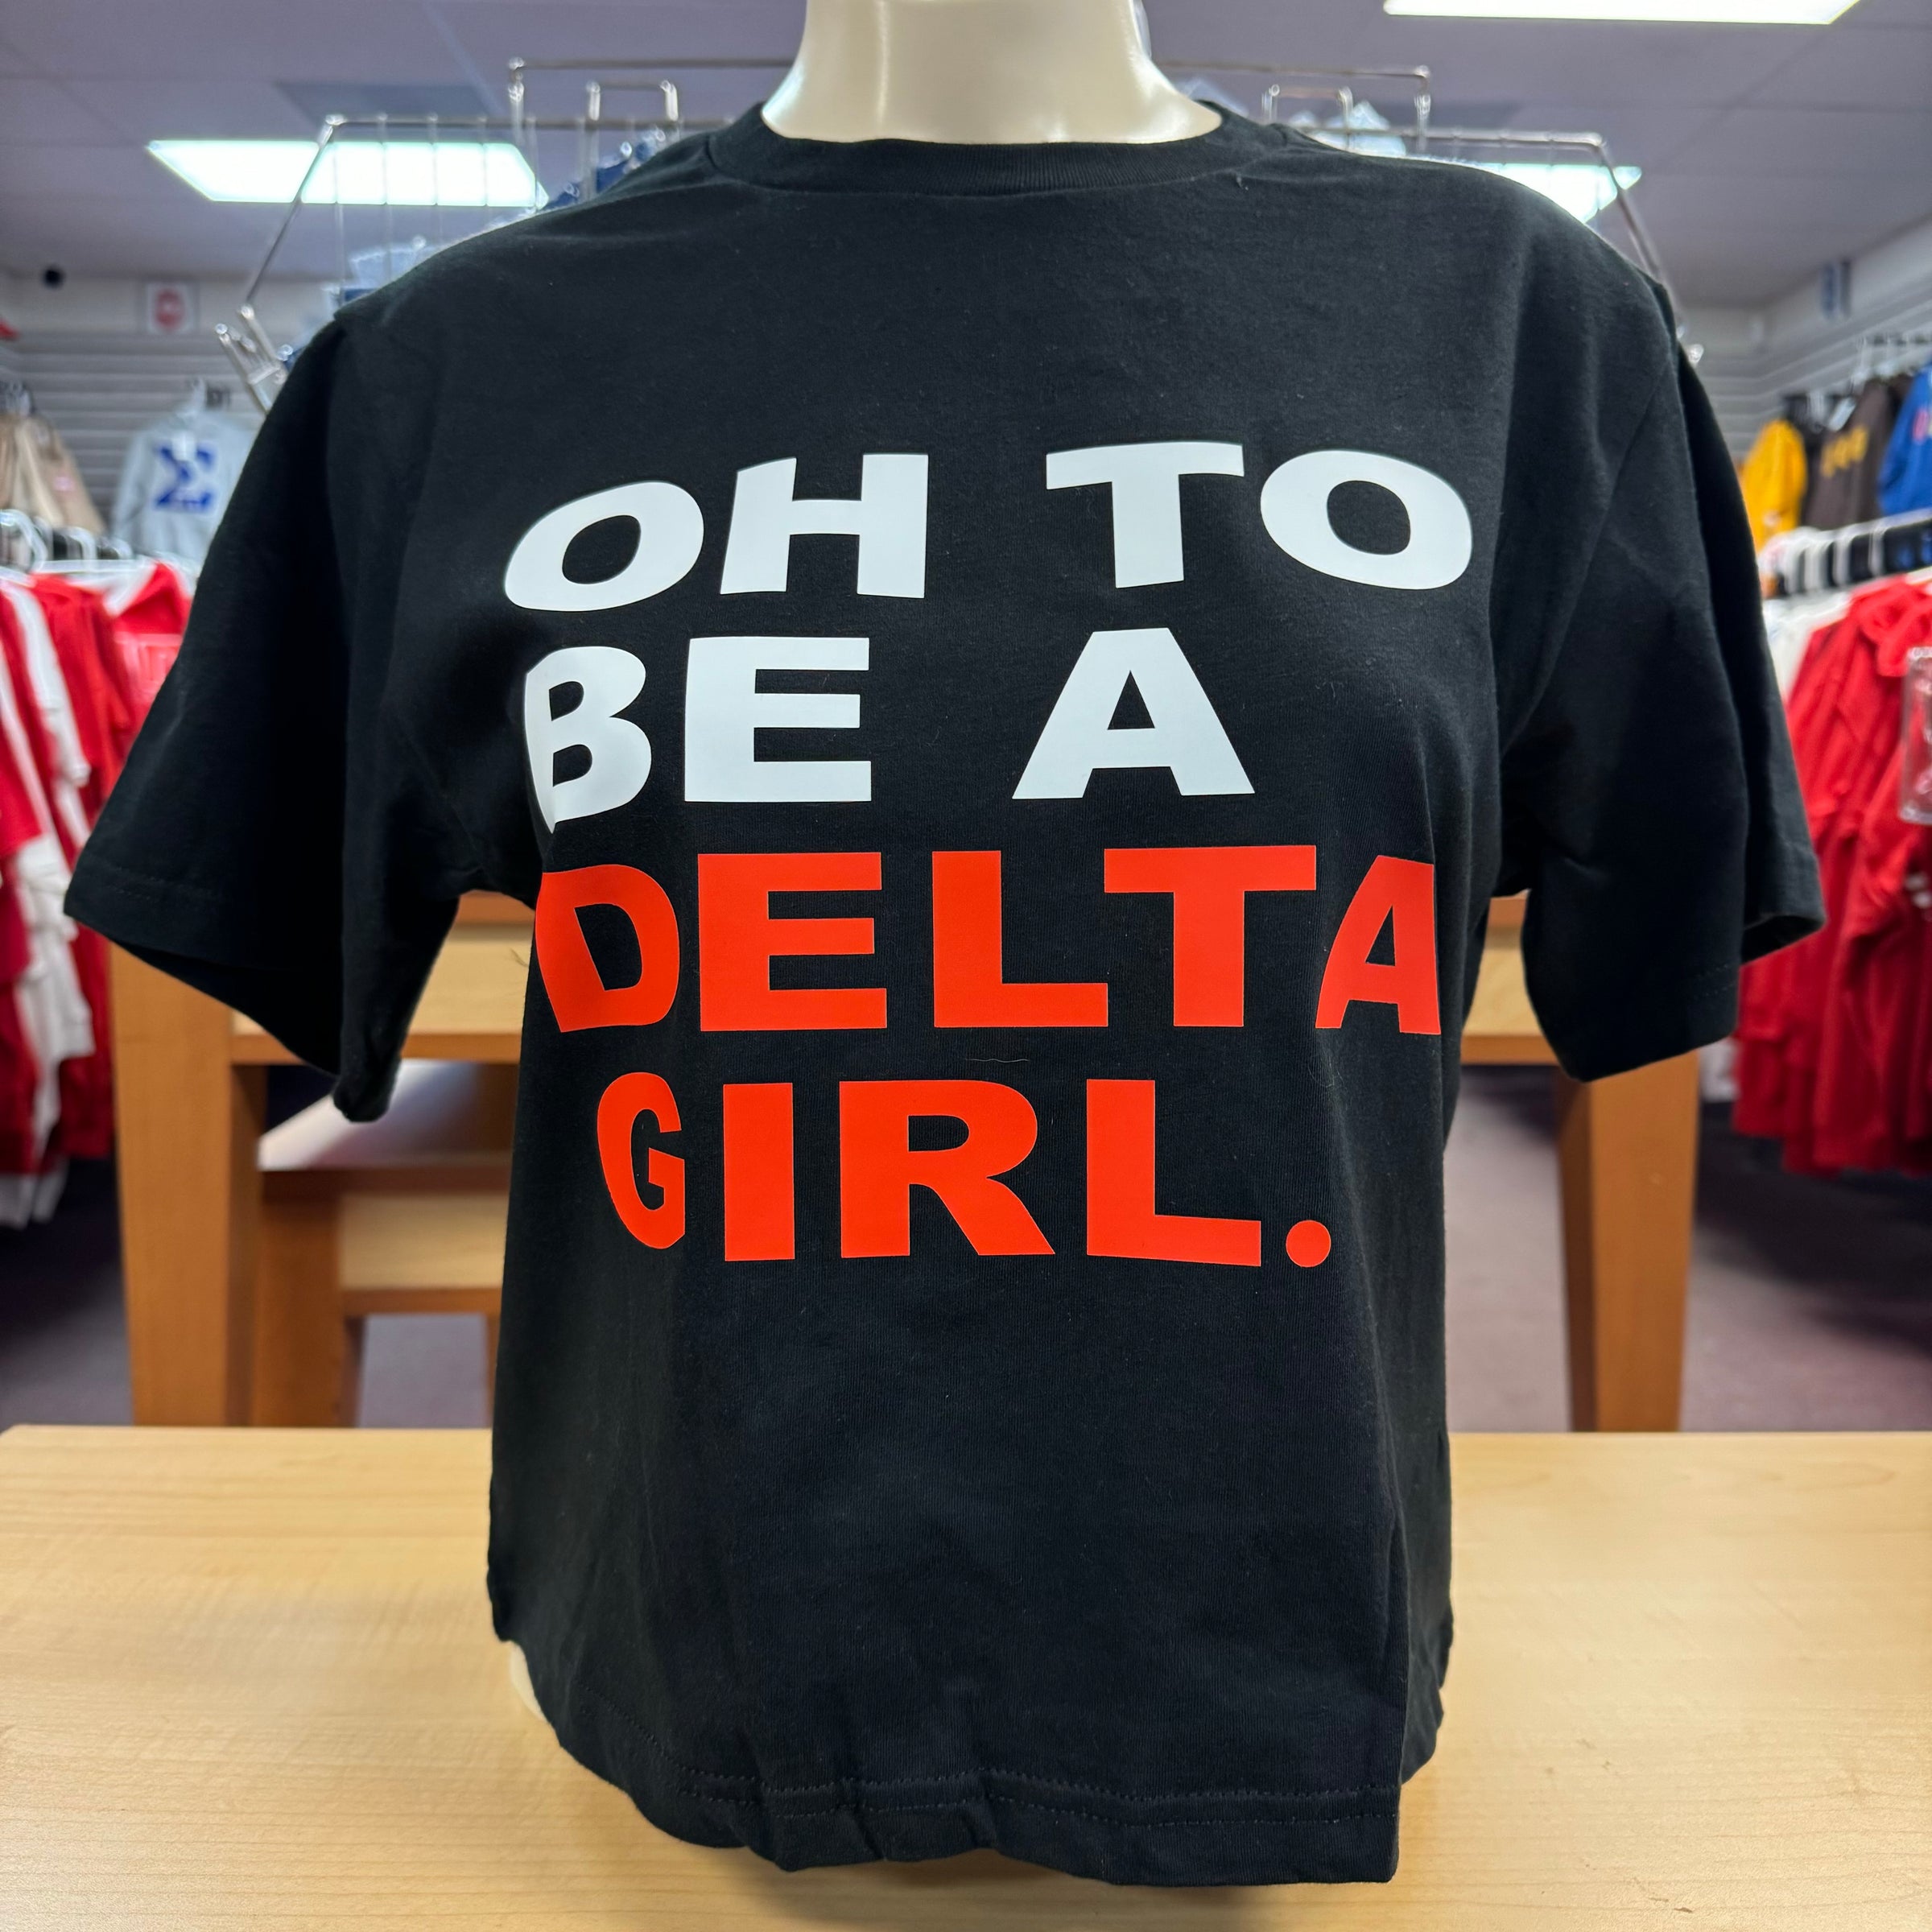 Delta OH TO BE A DELTA GIRL Crop Top